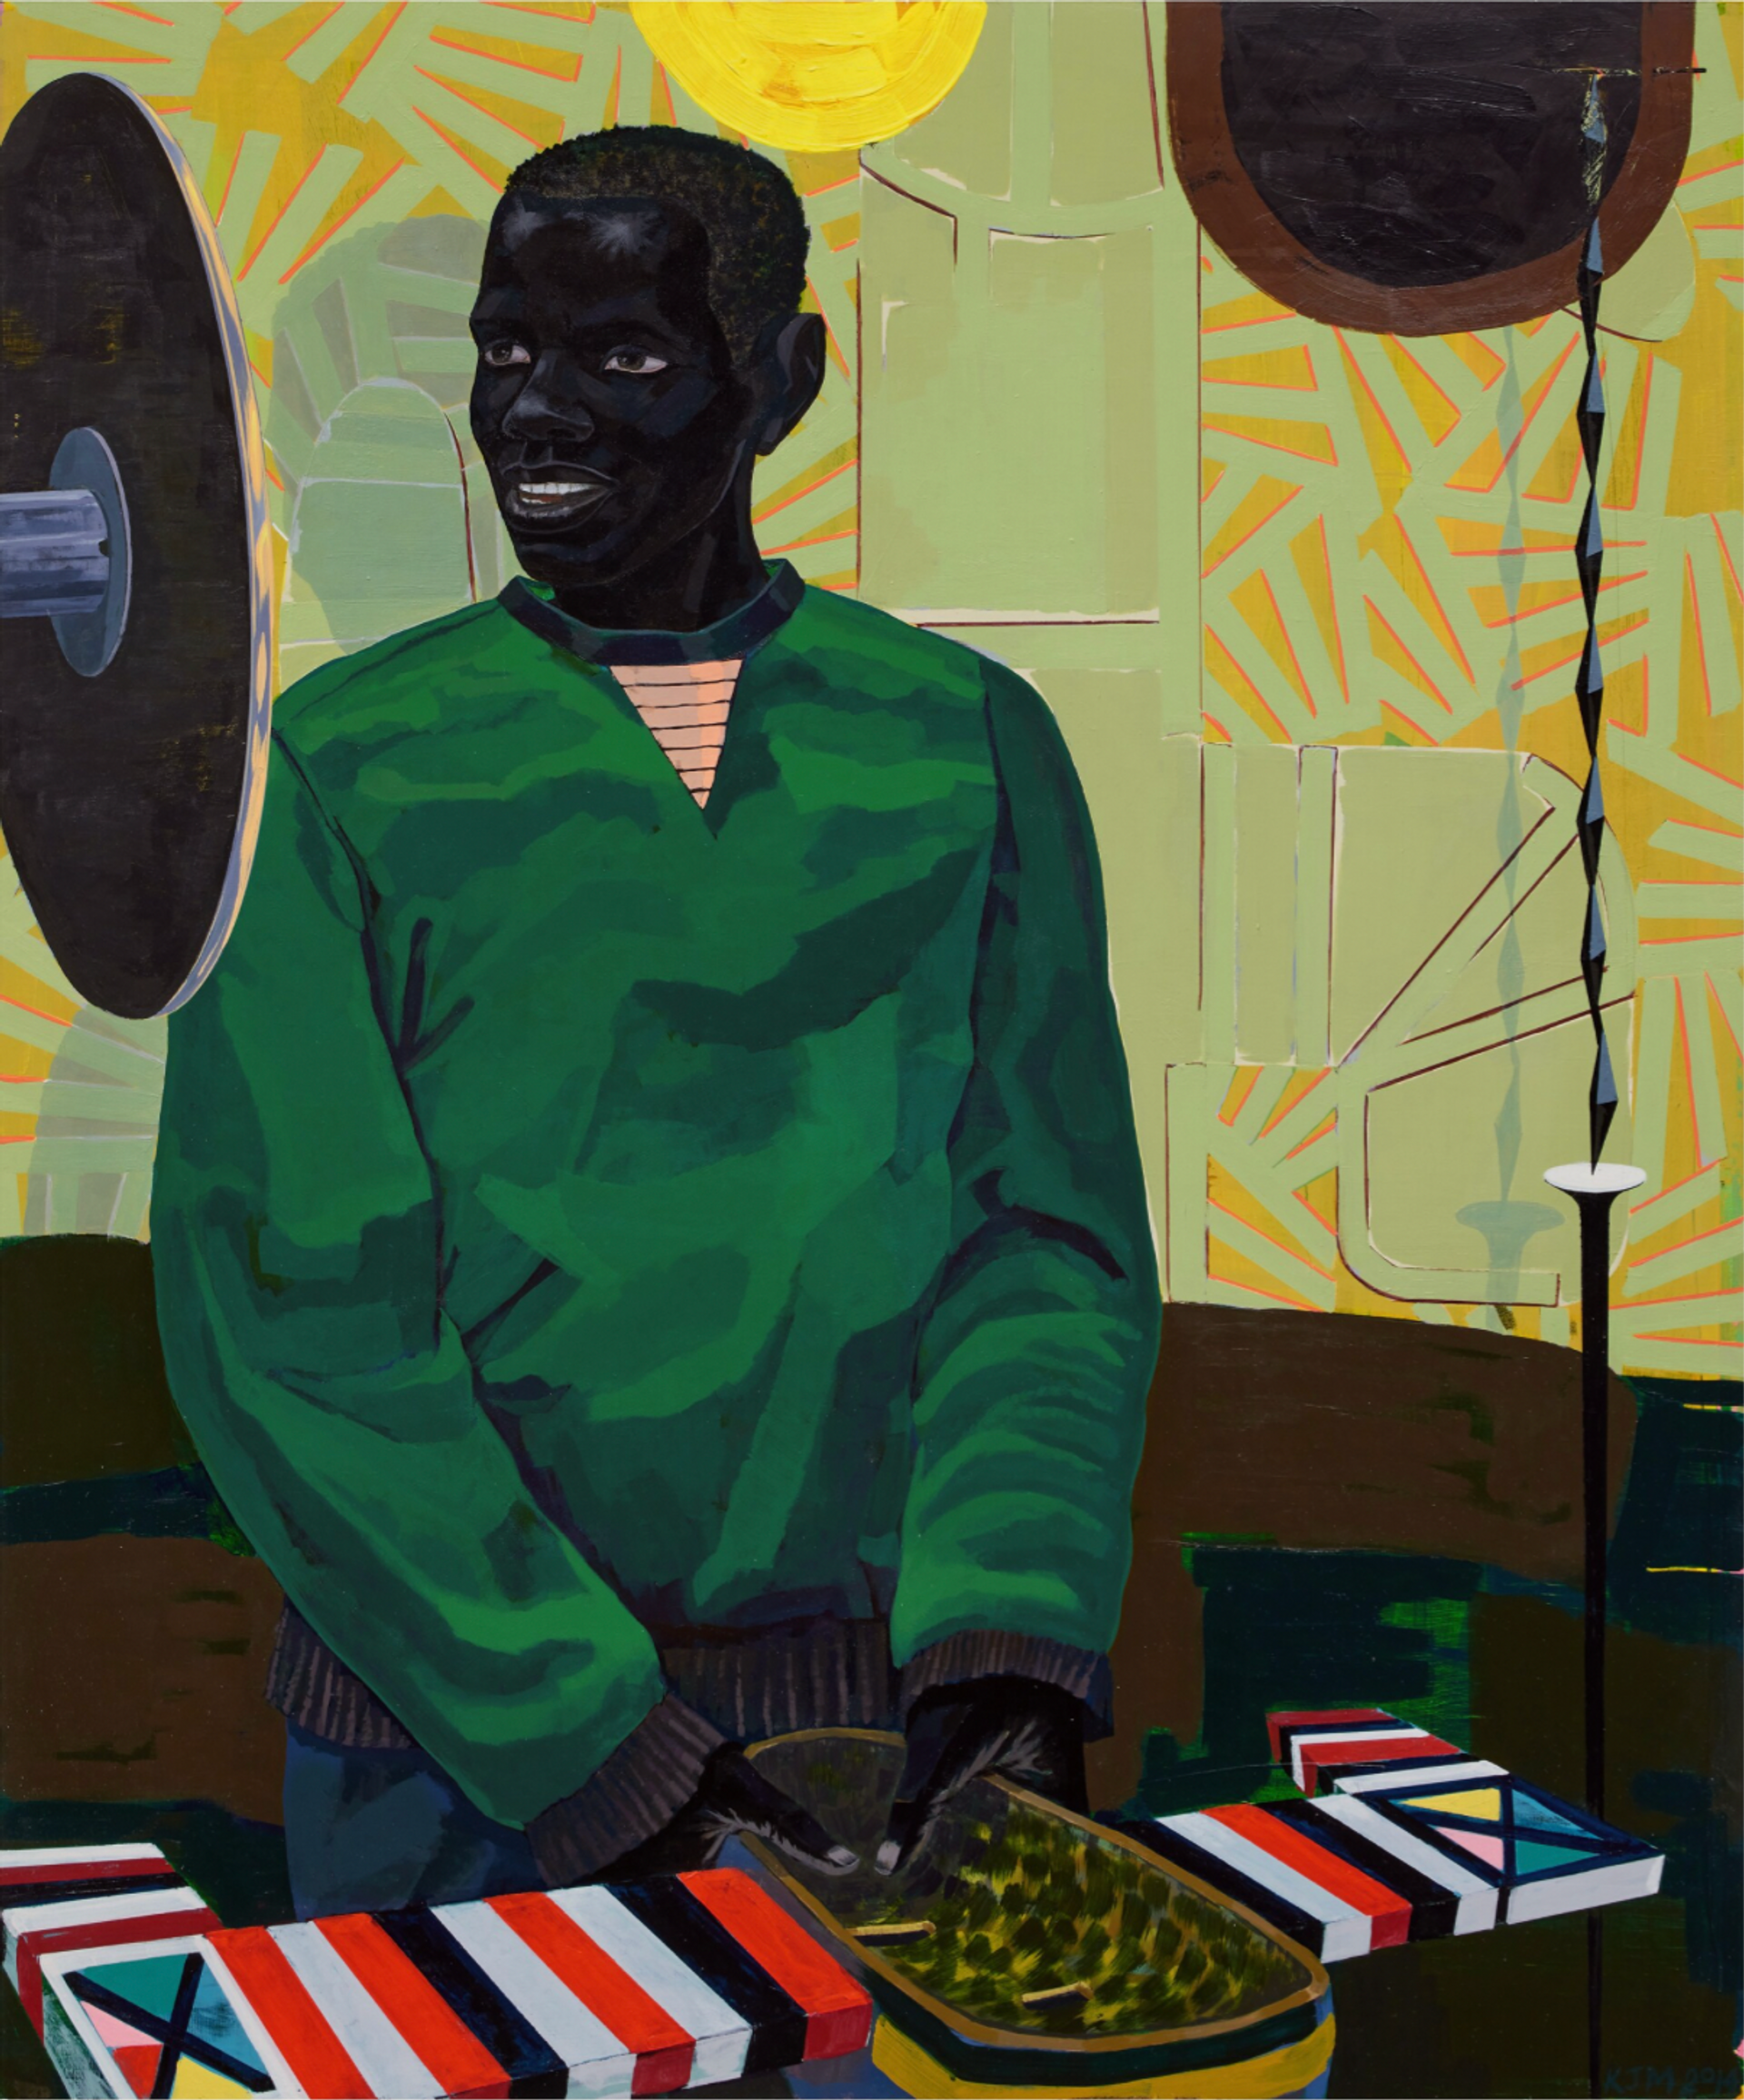 Large-scale portrait by Kerry James Marshall of a black man, standing and gazing at himself in a mirror, holding an African ritual mask. He wears a vibrant green jumper and blue trousers, set against pastel green and yellow wall adornments.